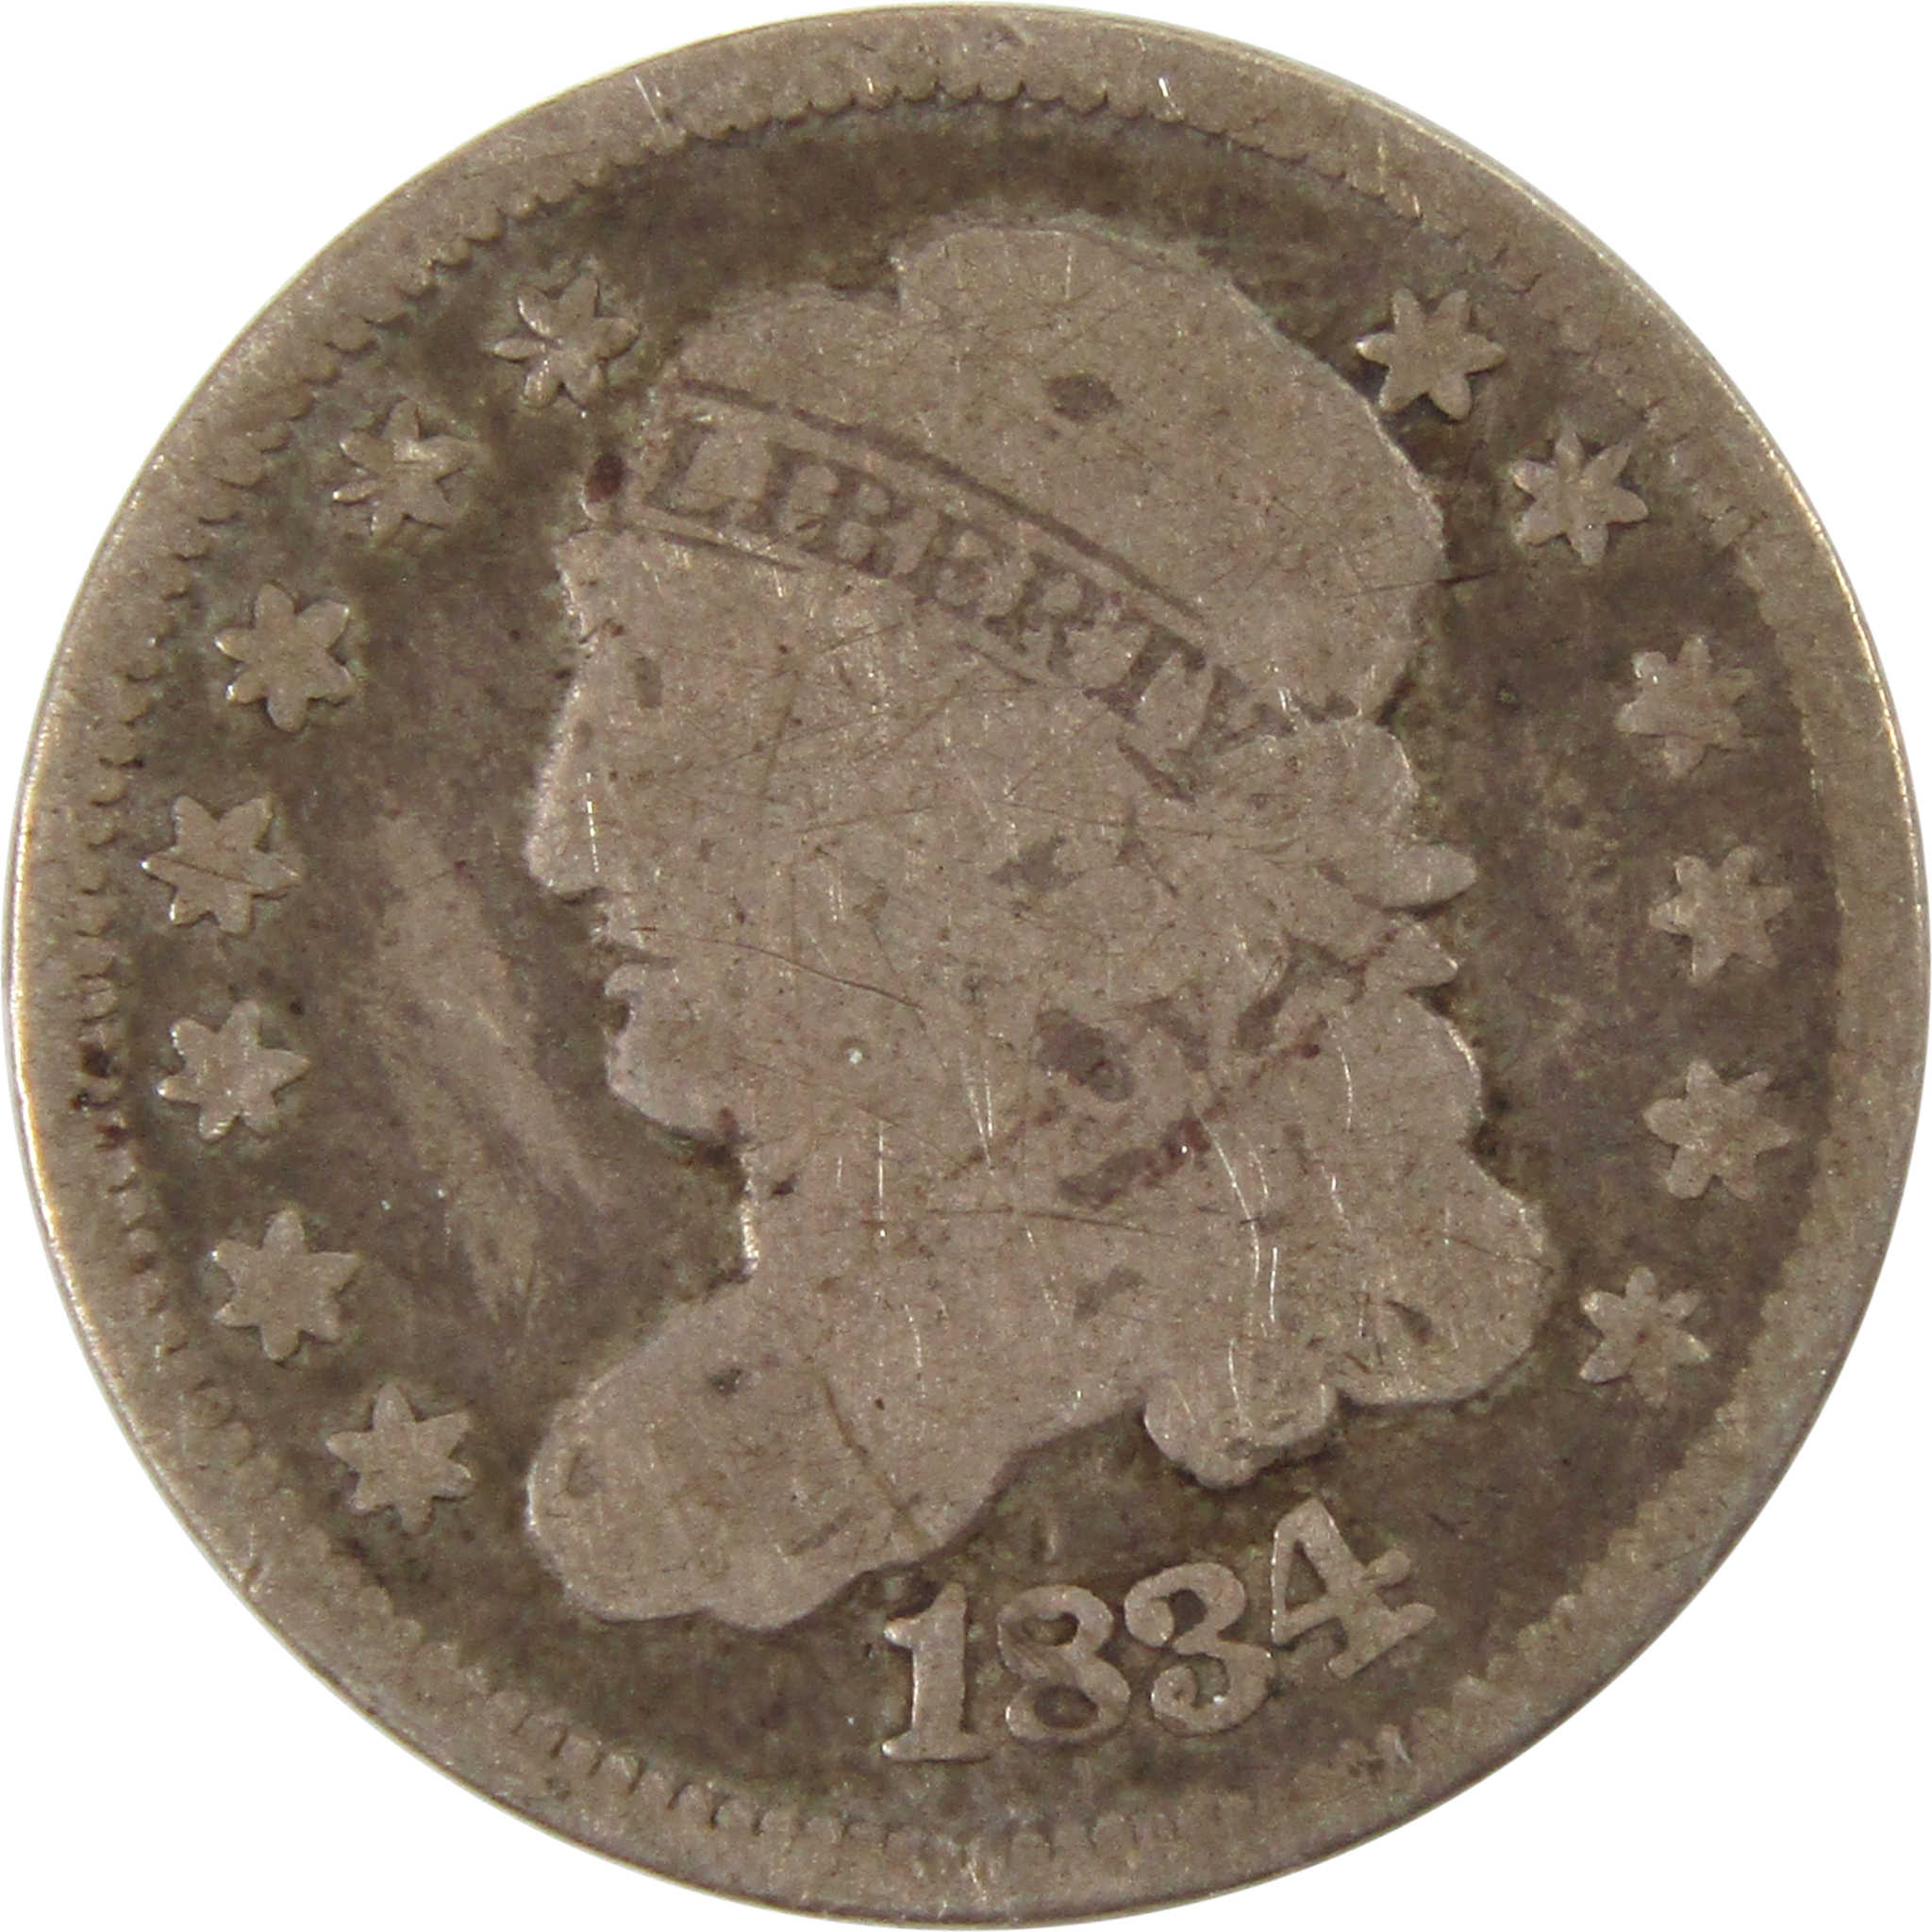 1834 Capped Bust Half Dime G Good 89.24% Silver 5c Coin SKU:I10138